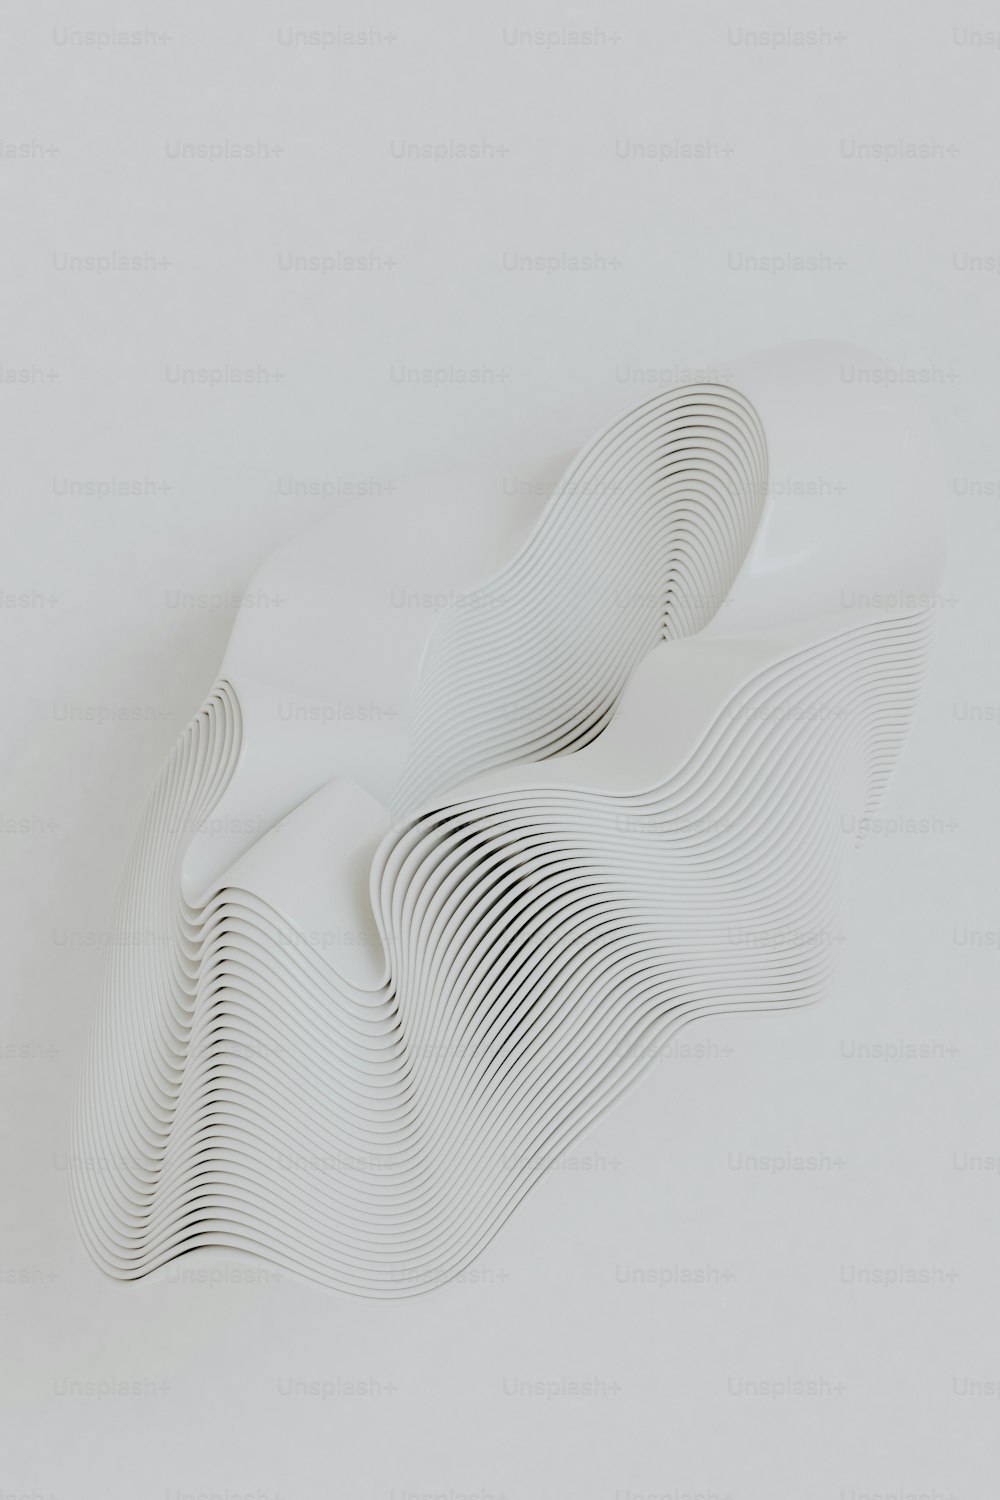 a white sculpture is shown against a white background